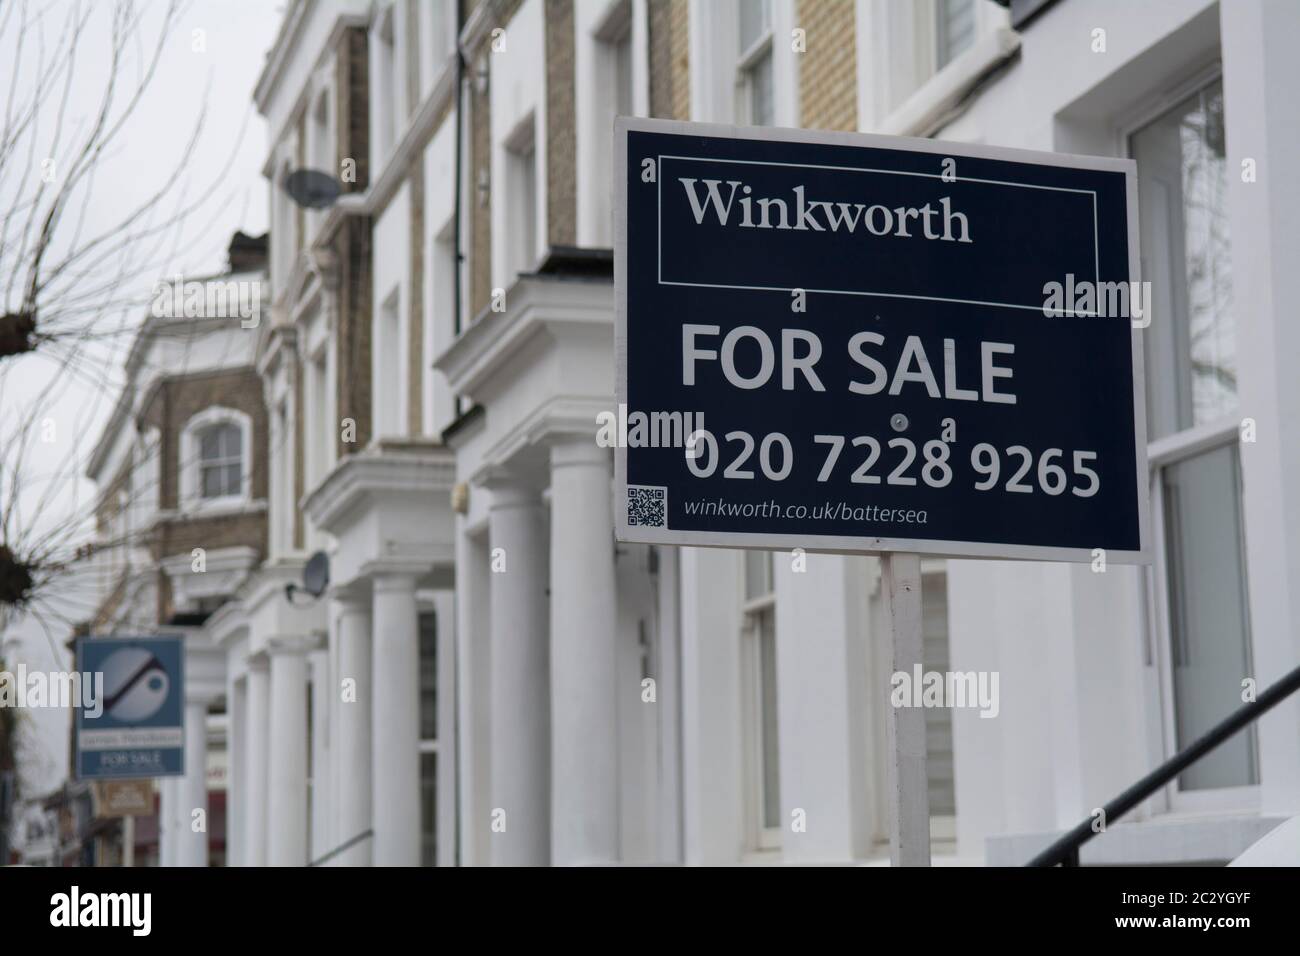 LONDON- Winkworth estate agent signs advertising property in London Stock Photo